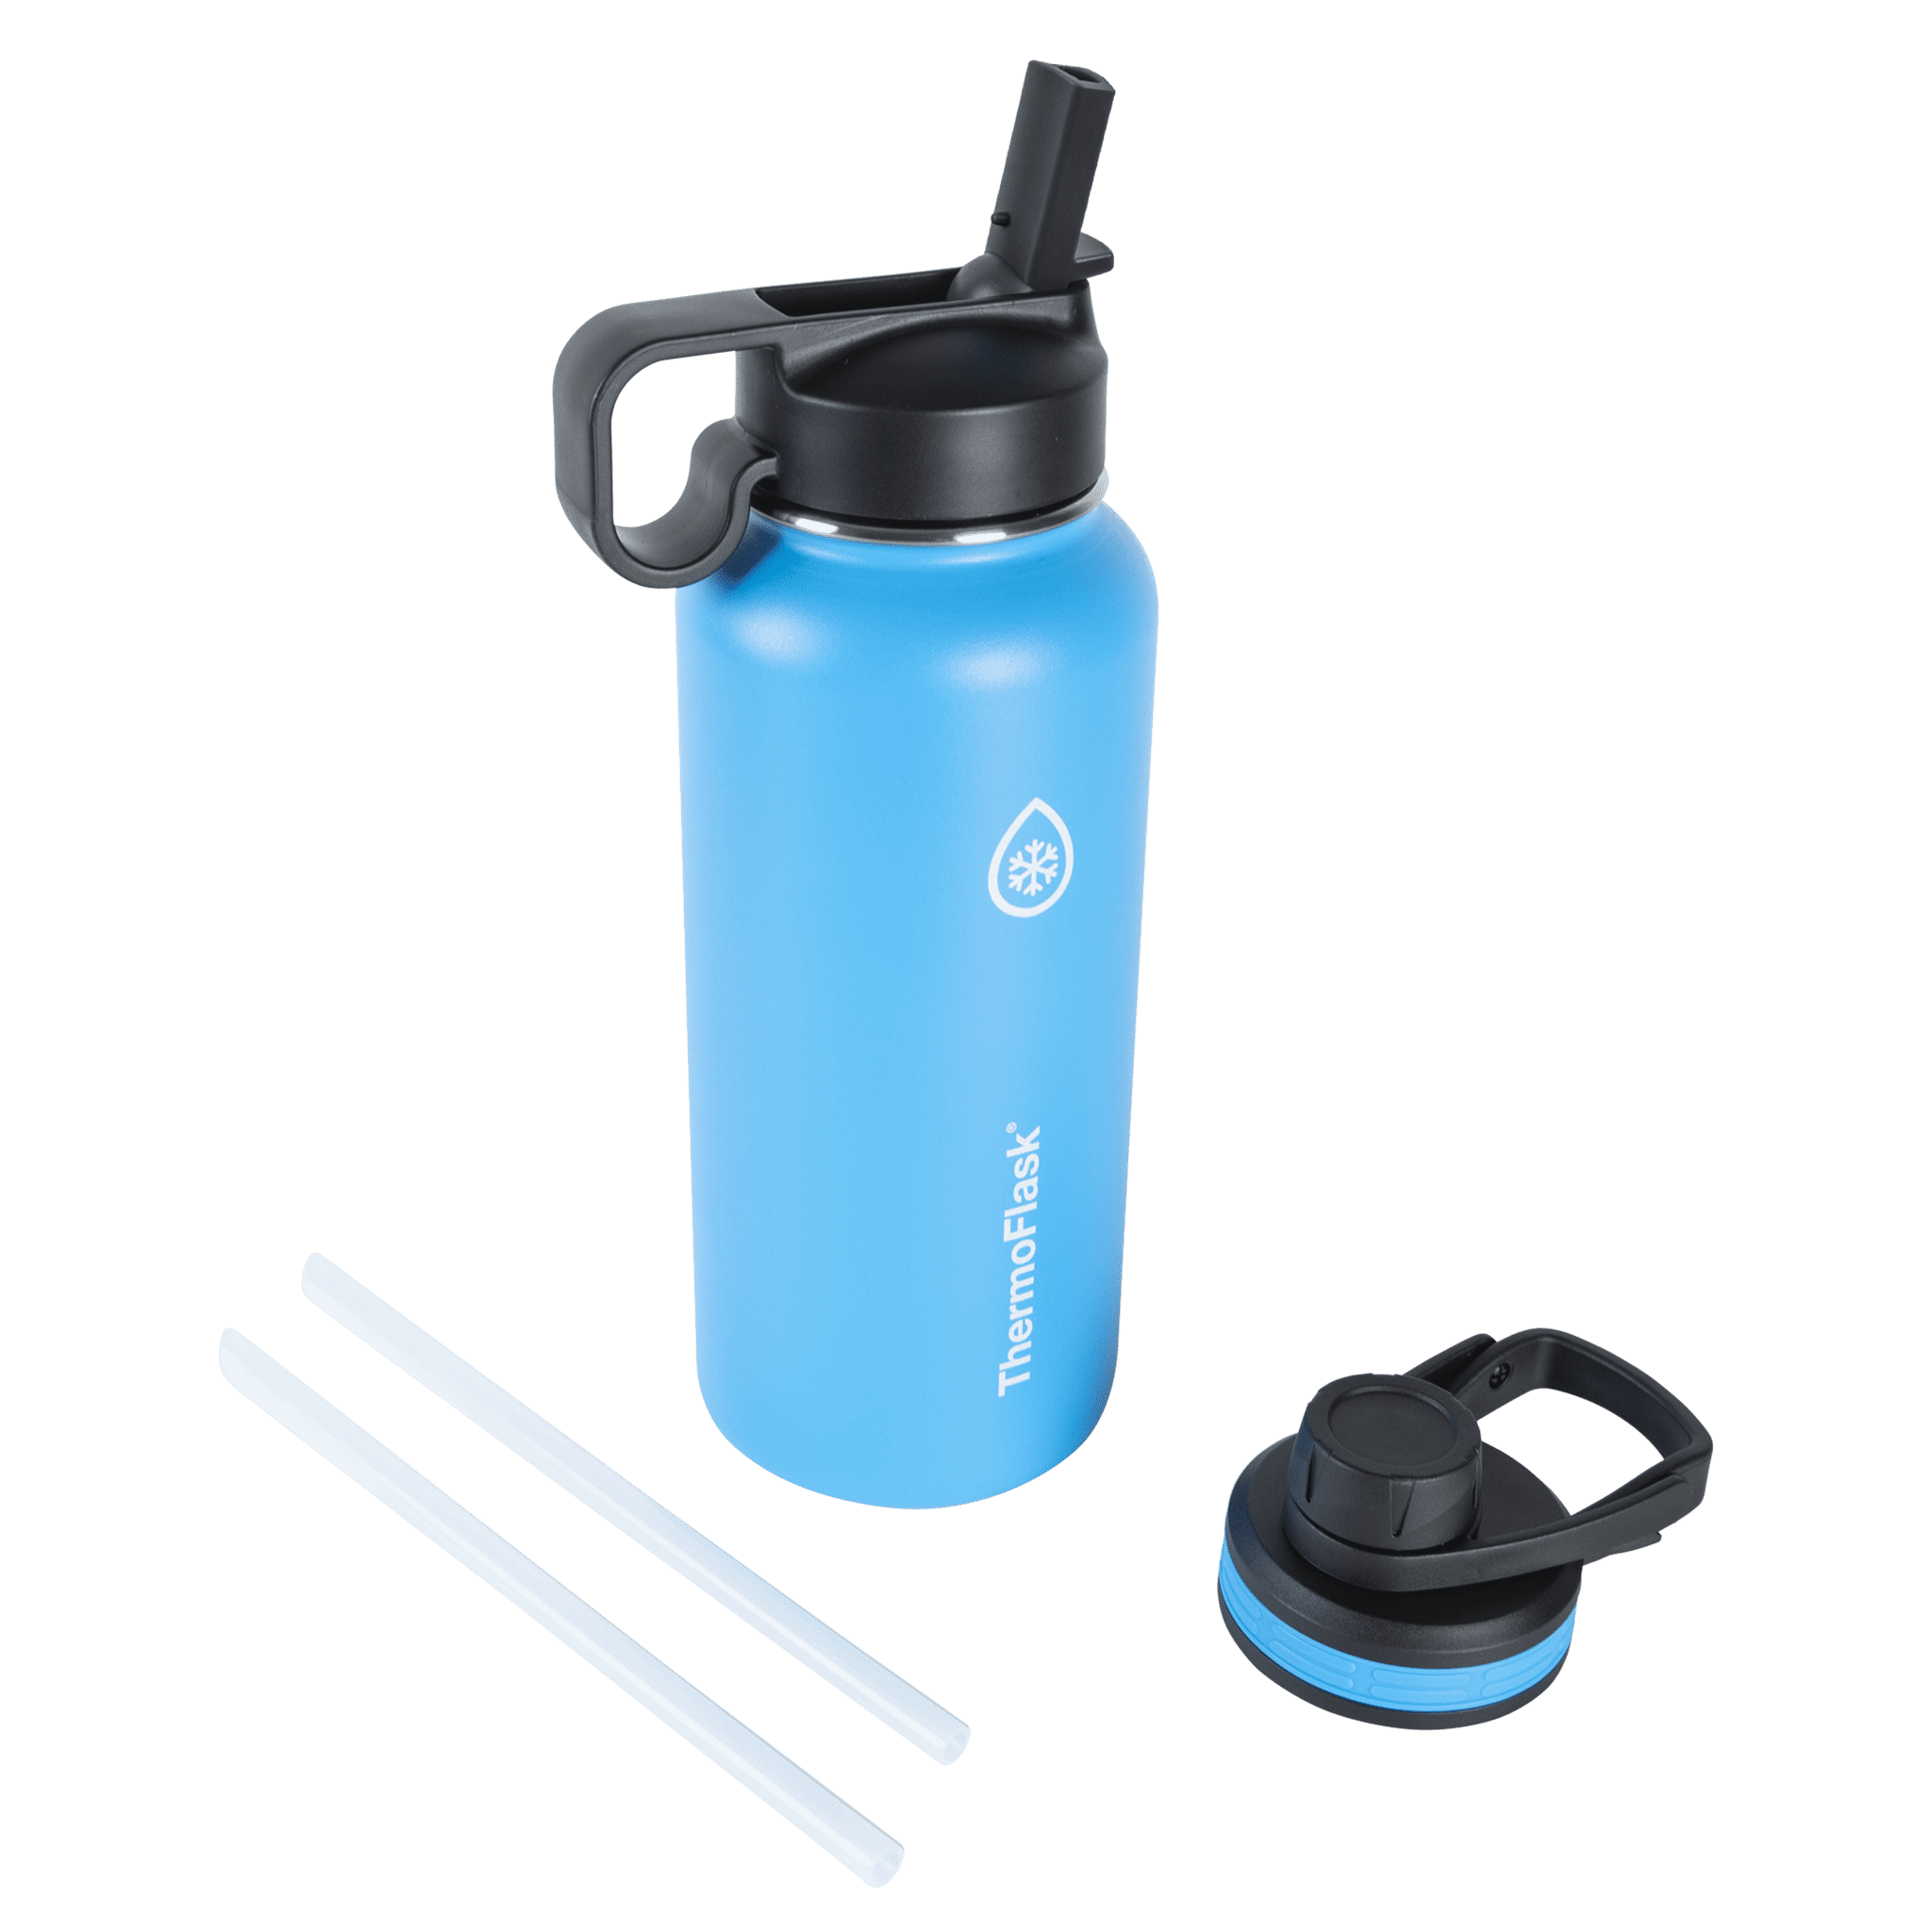 COKTIK Insulated Stainless Steel Water Bottle with Straw Lid, 22